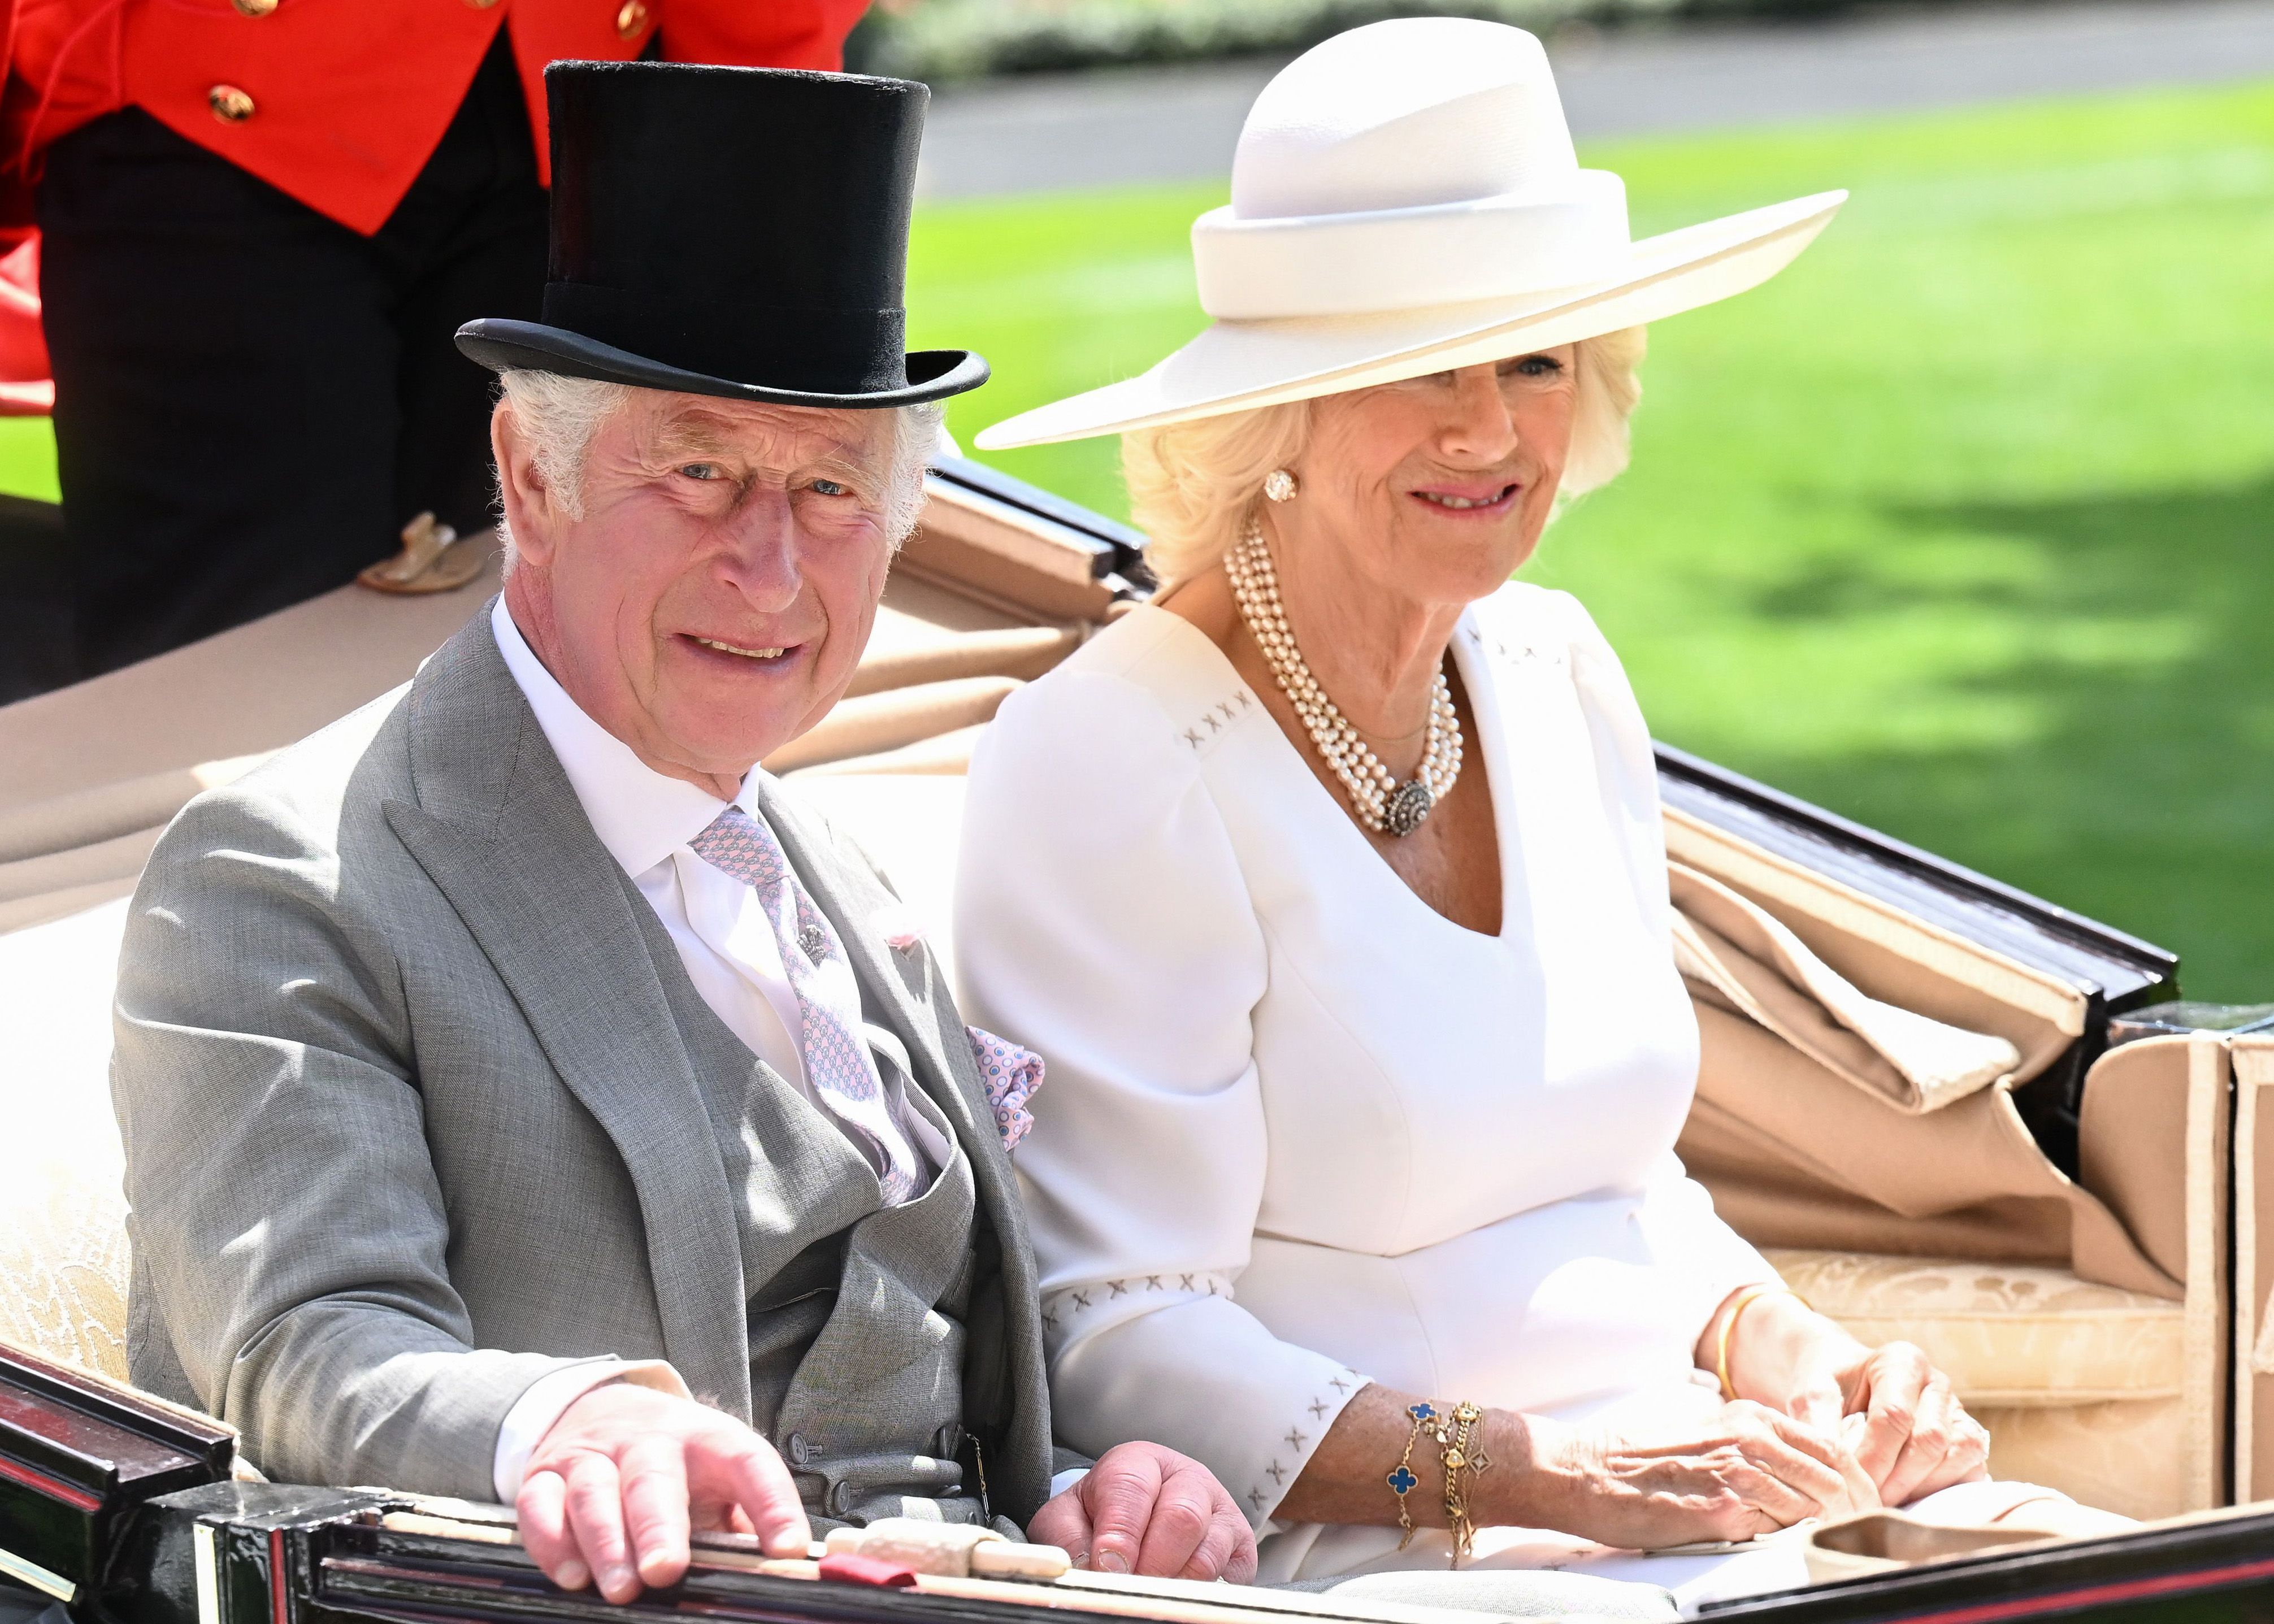 Prince Charles, Prince of Wales and Camilla, Duchess of Cornwall attend Royal Ascot 2022 at Ascot Racecourse on June 15, 2022 in Ascot, England. | Source: Getty Images